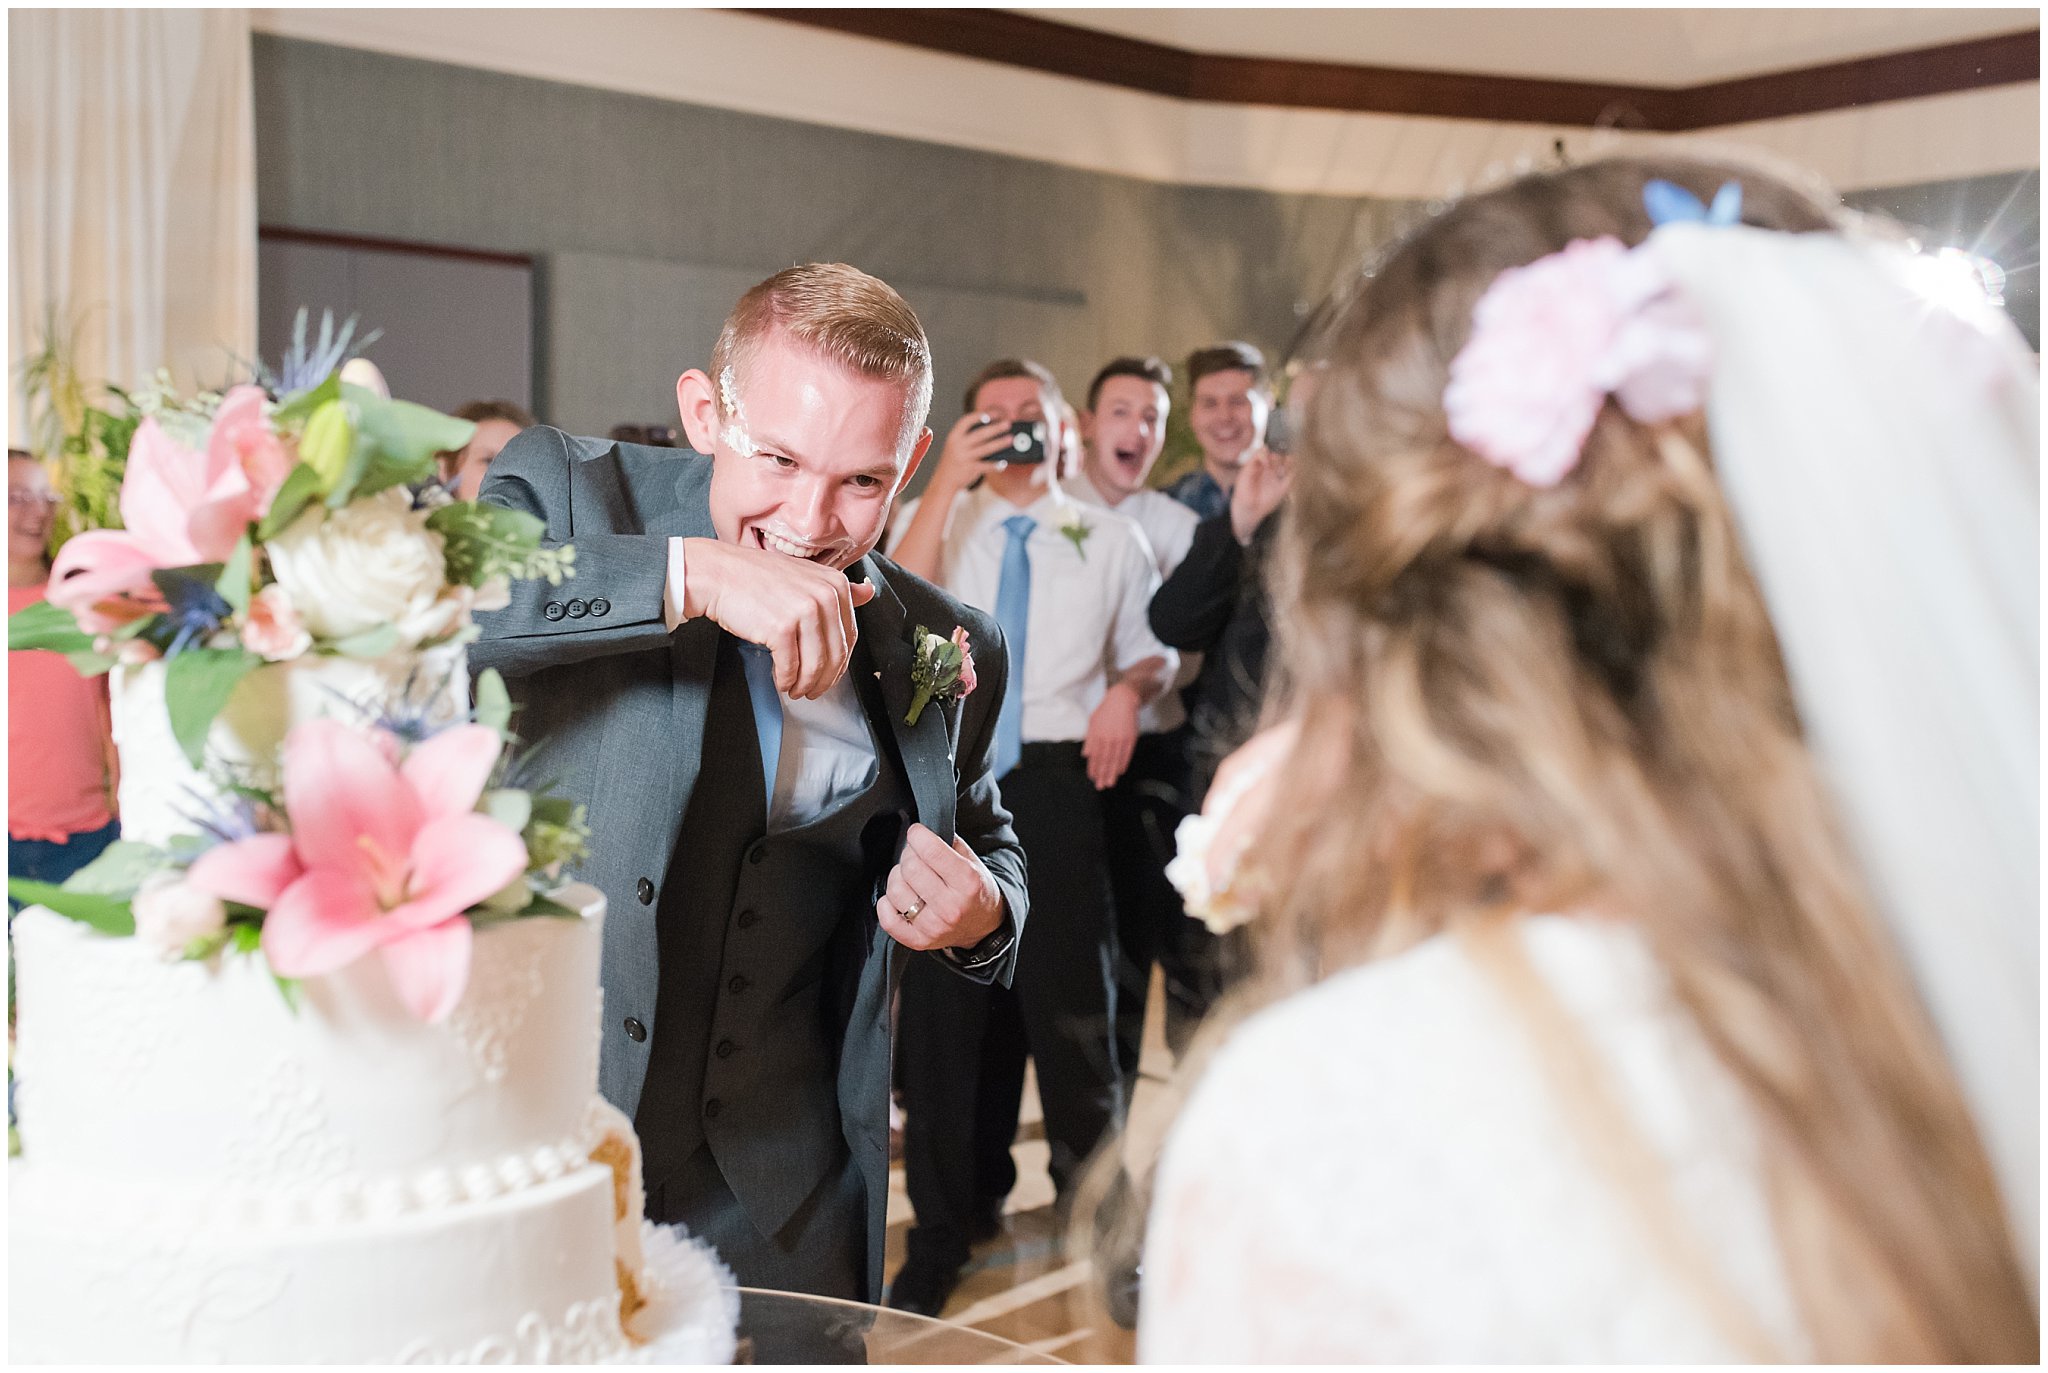 Tropical wedding cake and cake cutting during Utah reception | Jessie and Dallin Photography